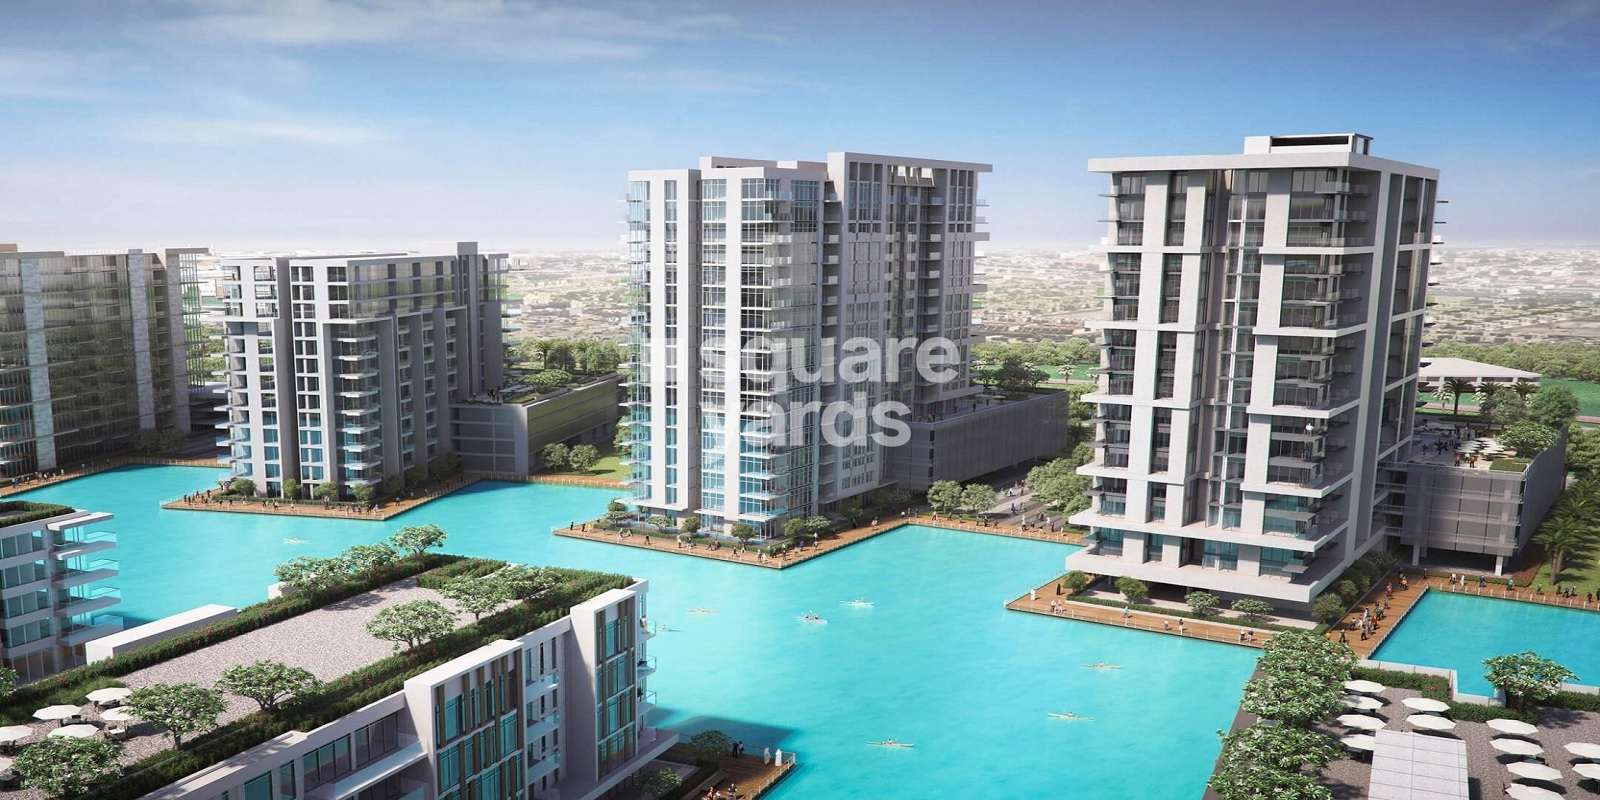 Meydan The Residences Cover Image